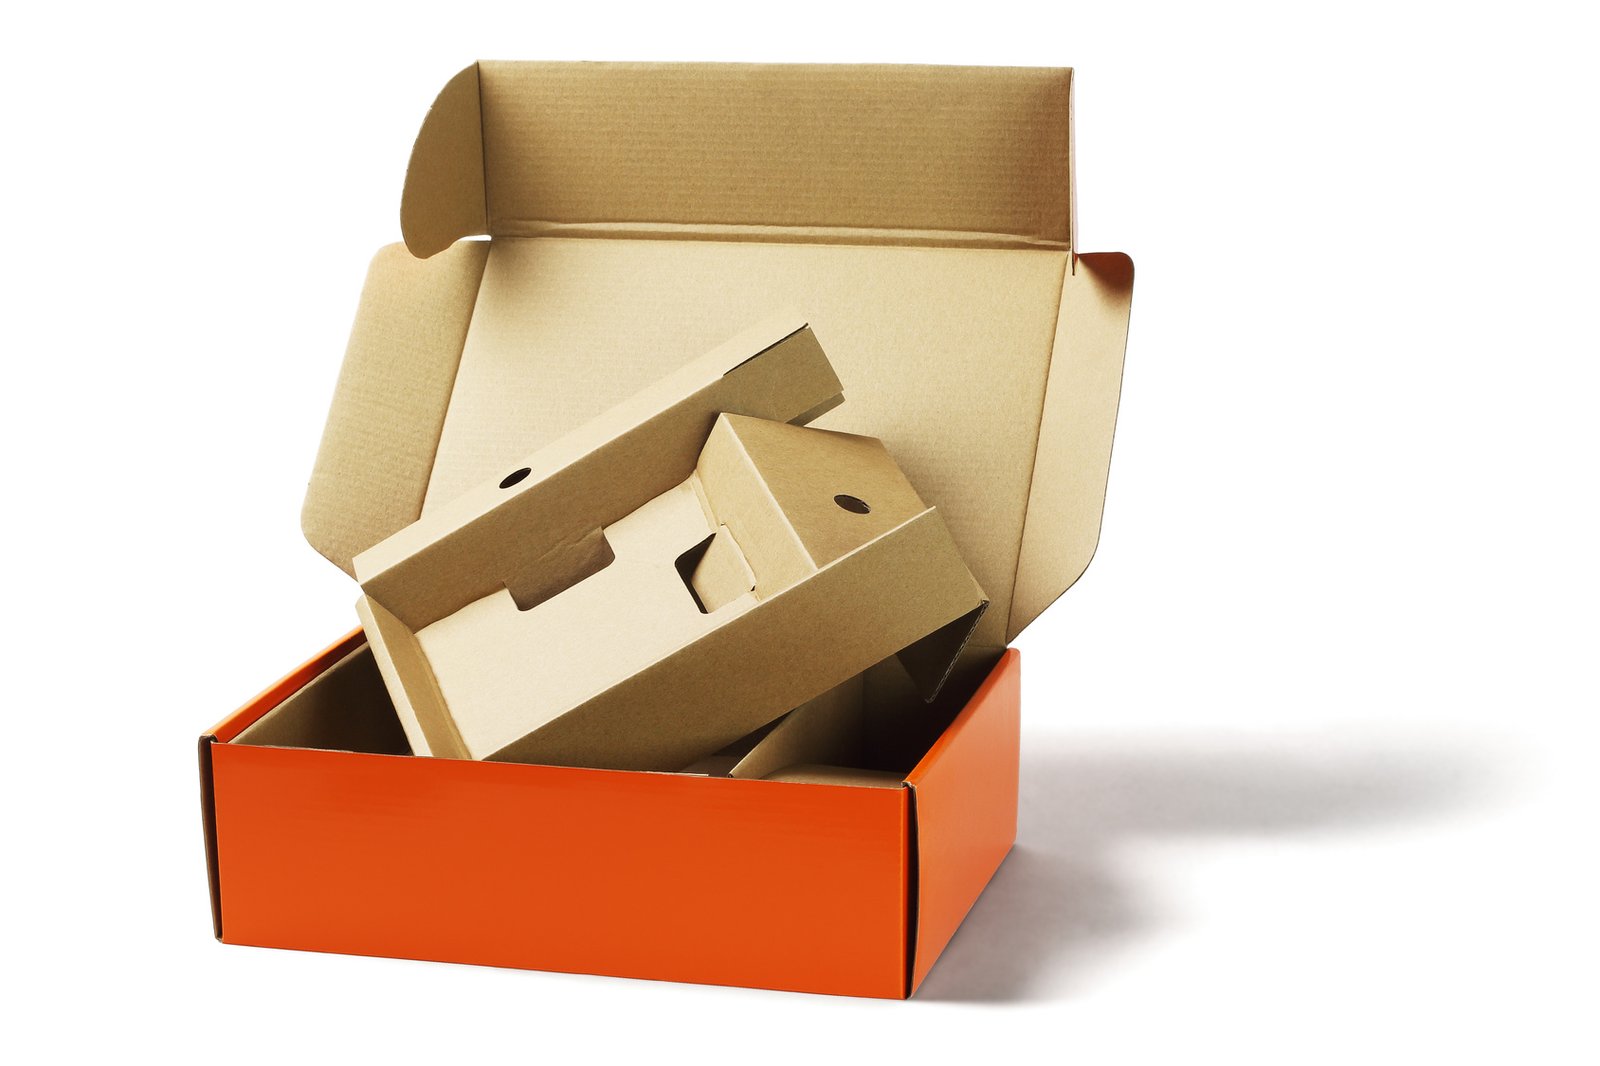 From Shipping to Branding: The Versatility of Mailer Boxes